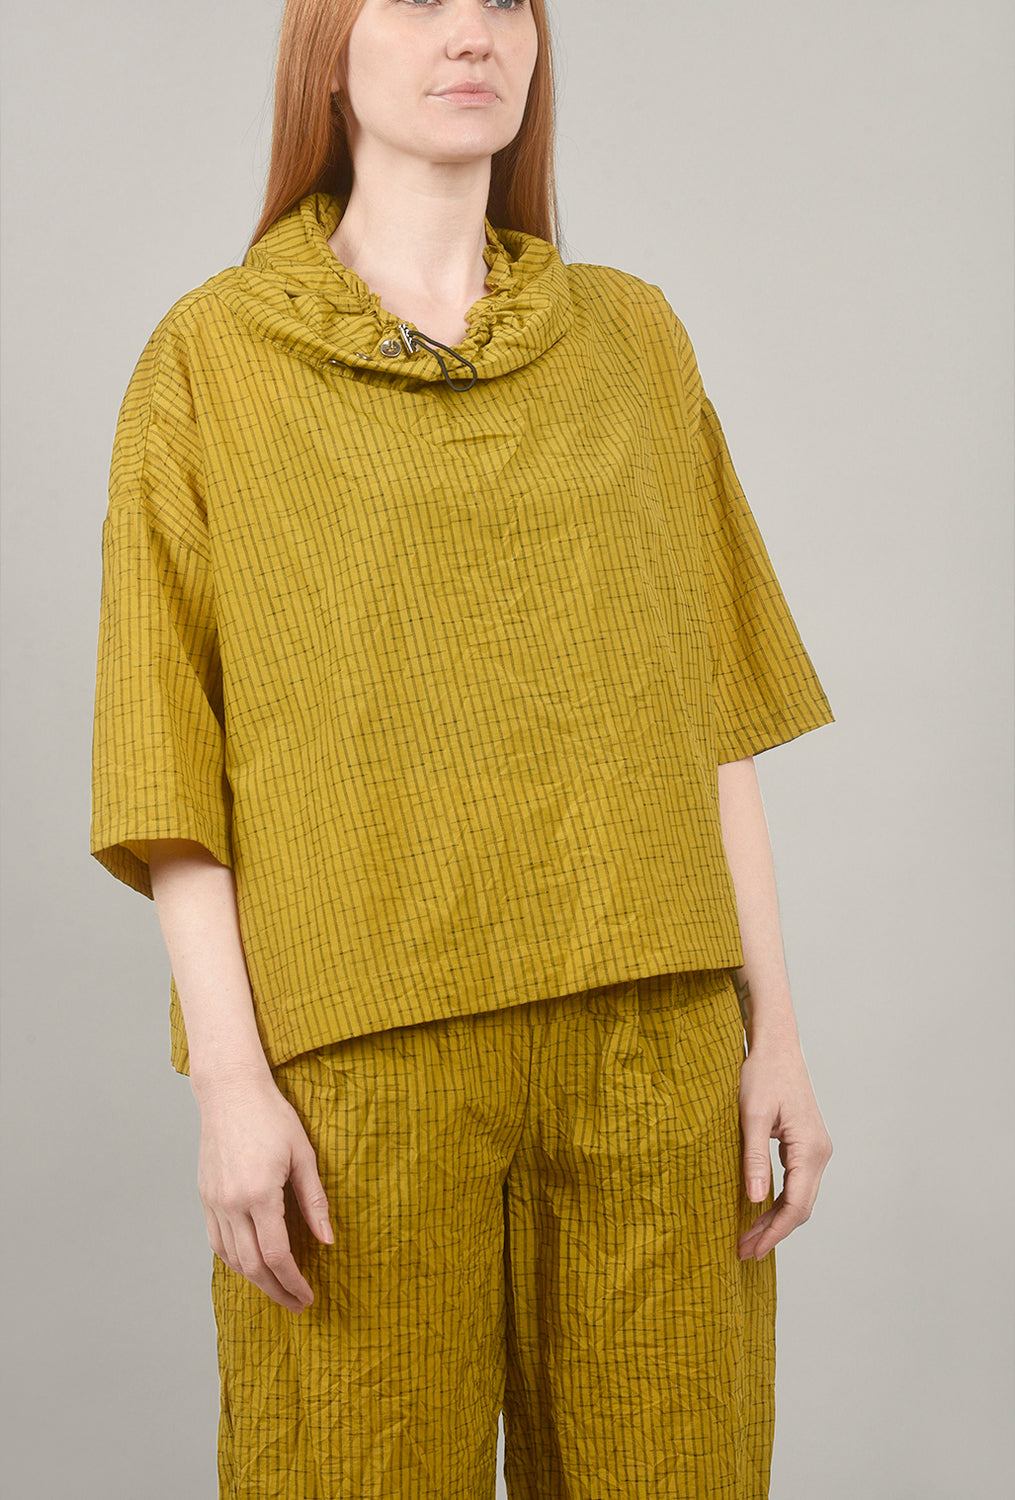 Imogen Top, Tuscany Gold